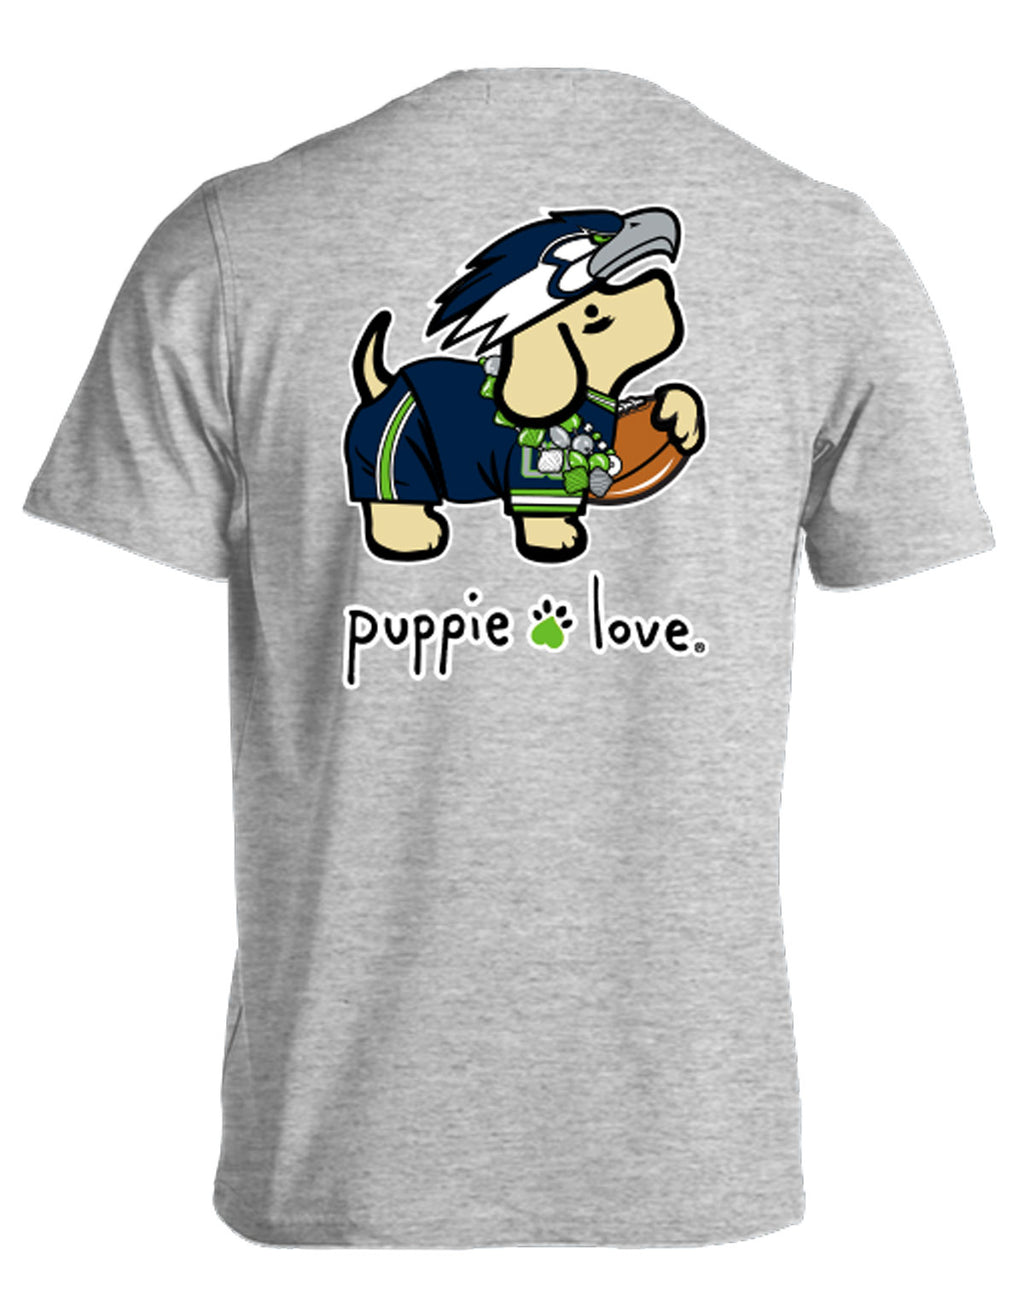 GREEN AND NAVY MASCOT PUP - Puppie Love